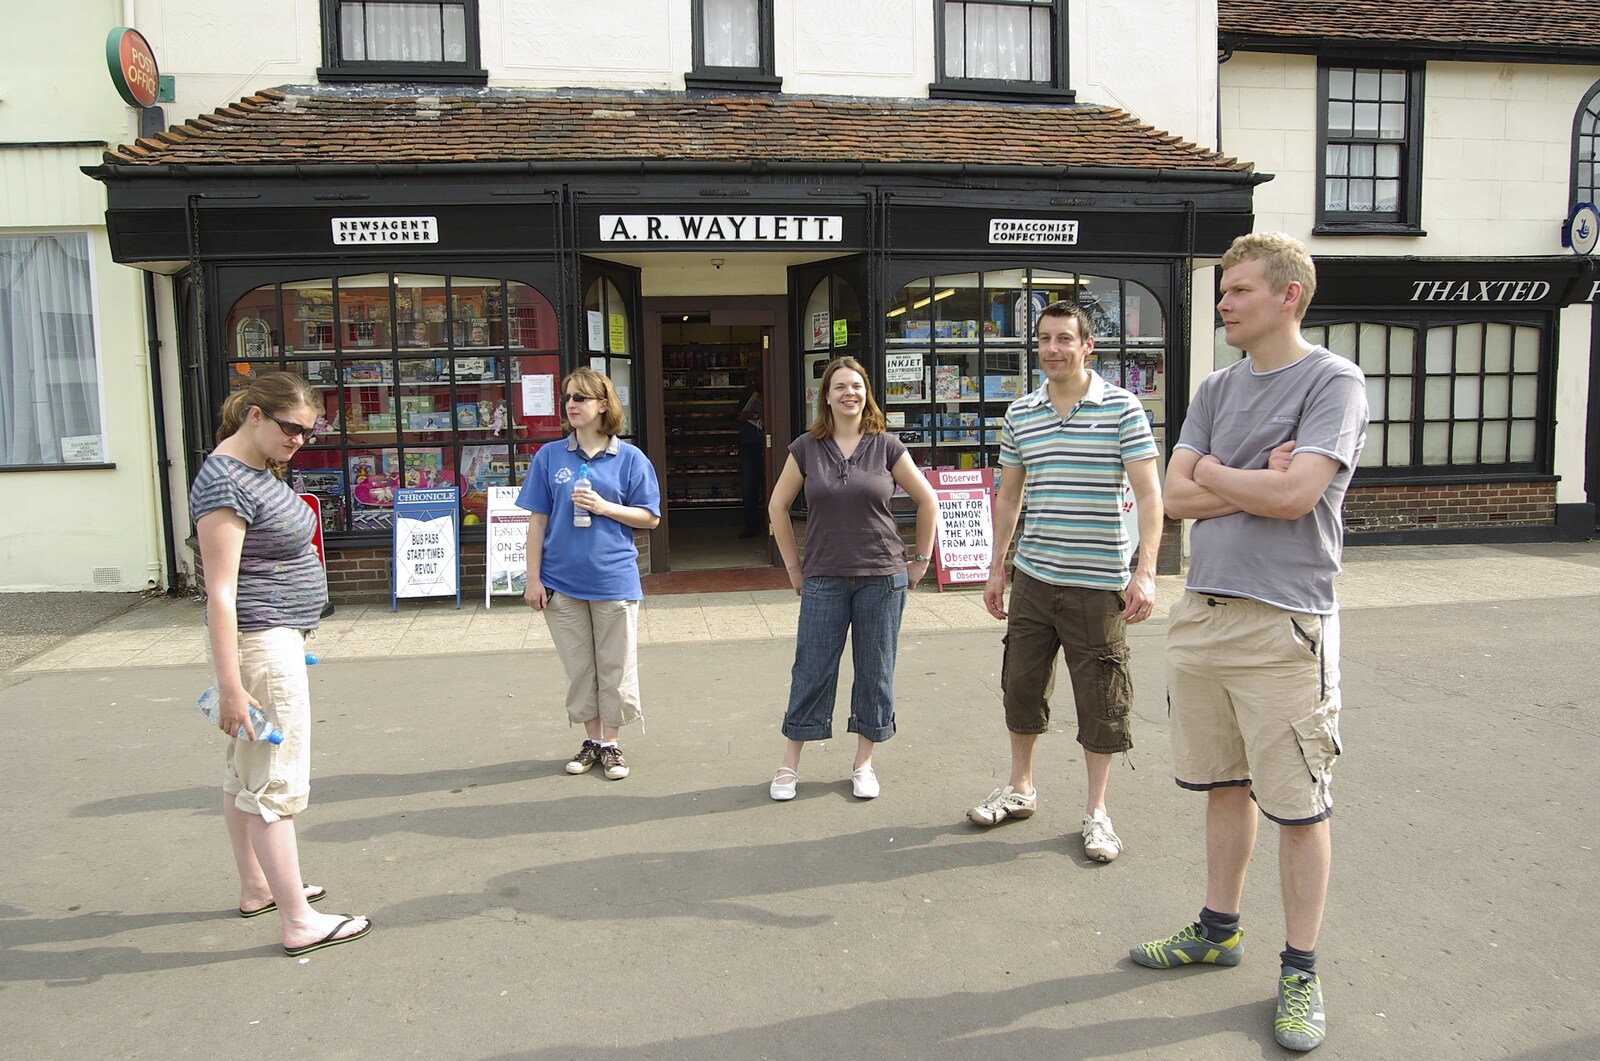 The BSCC Weekend Away, Thaxted, Essex - 10th May 2008: Hanging around outside Waylett's shop 